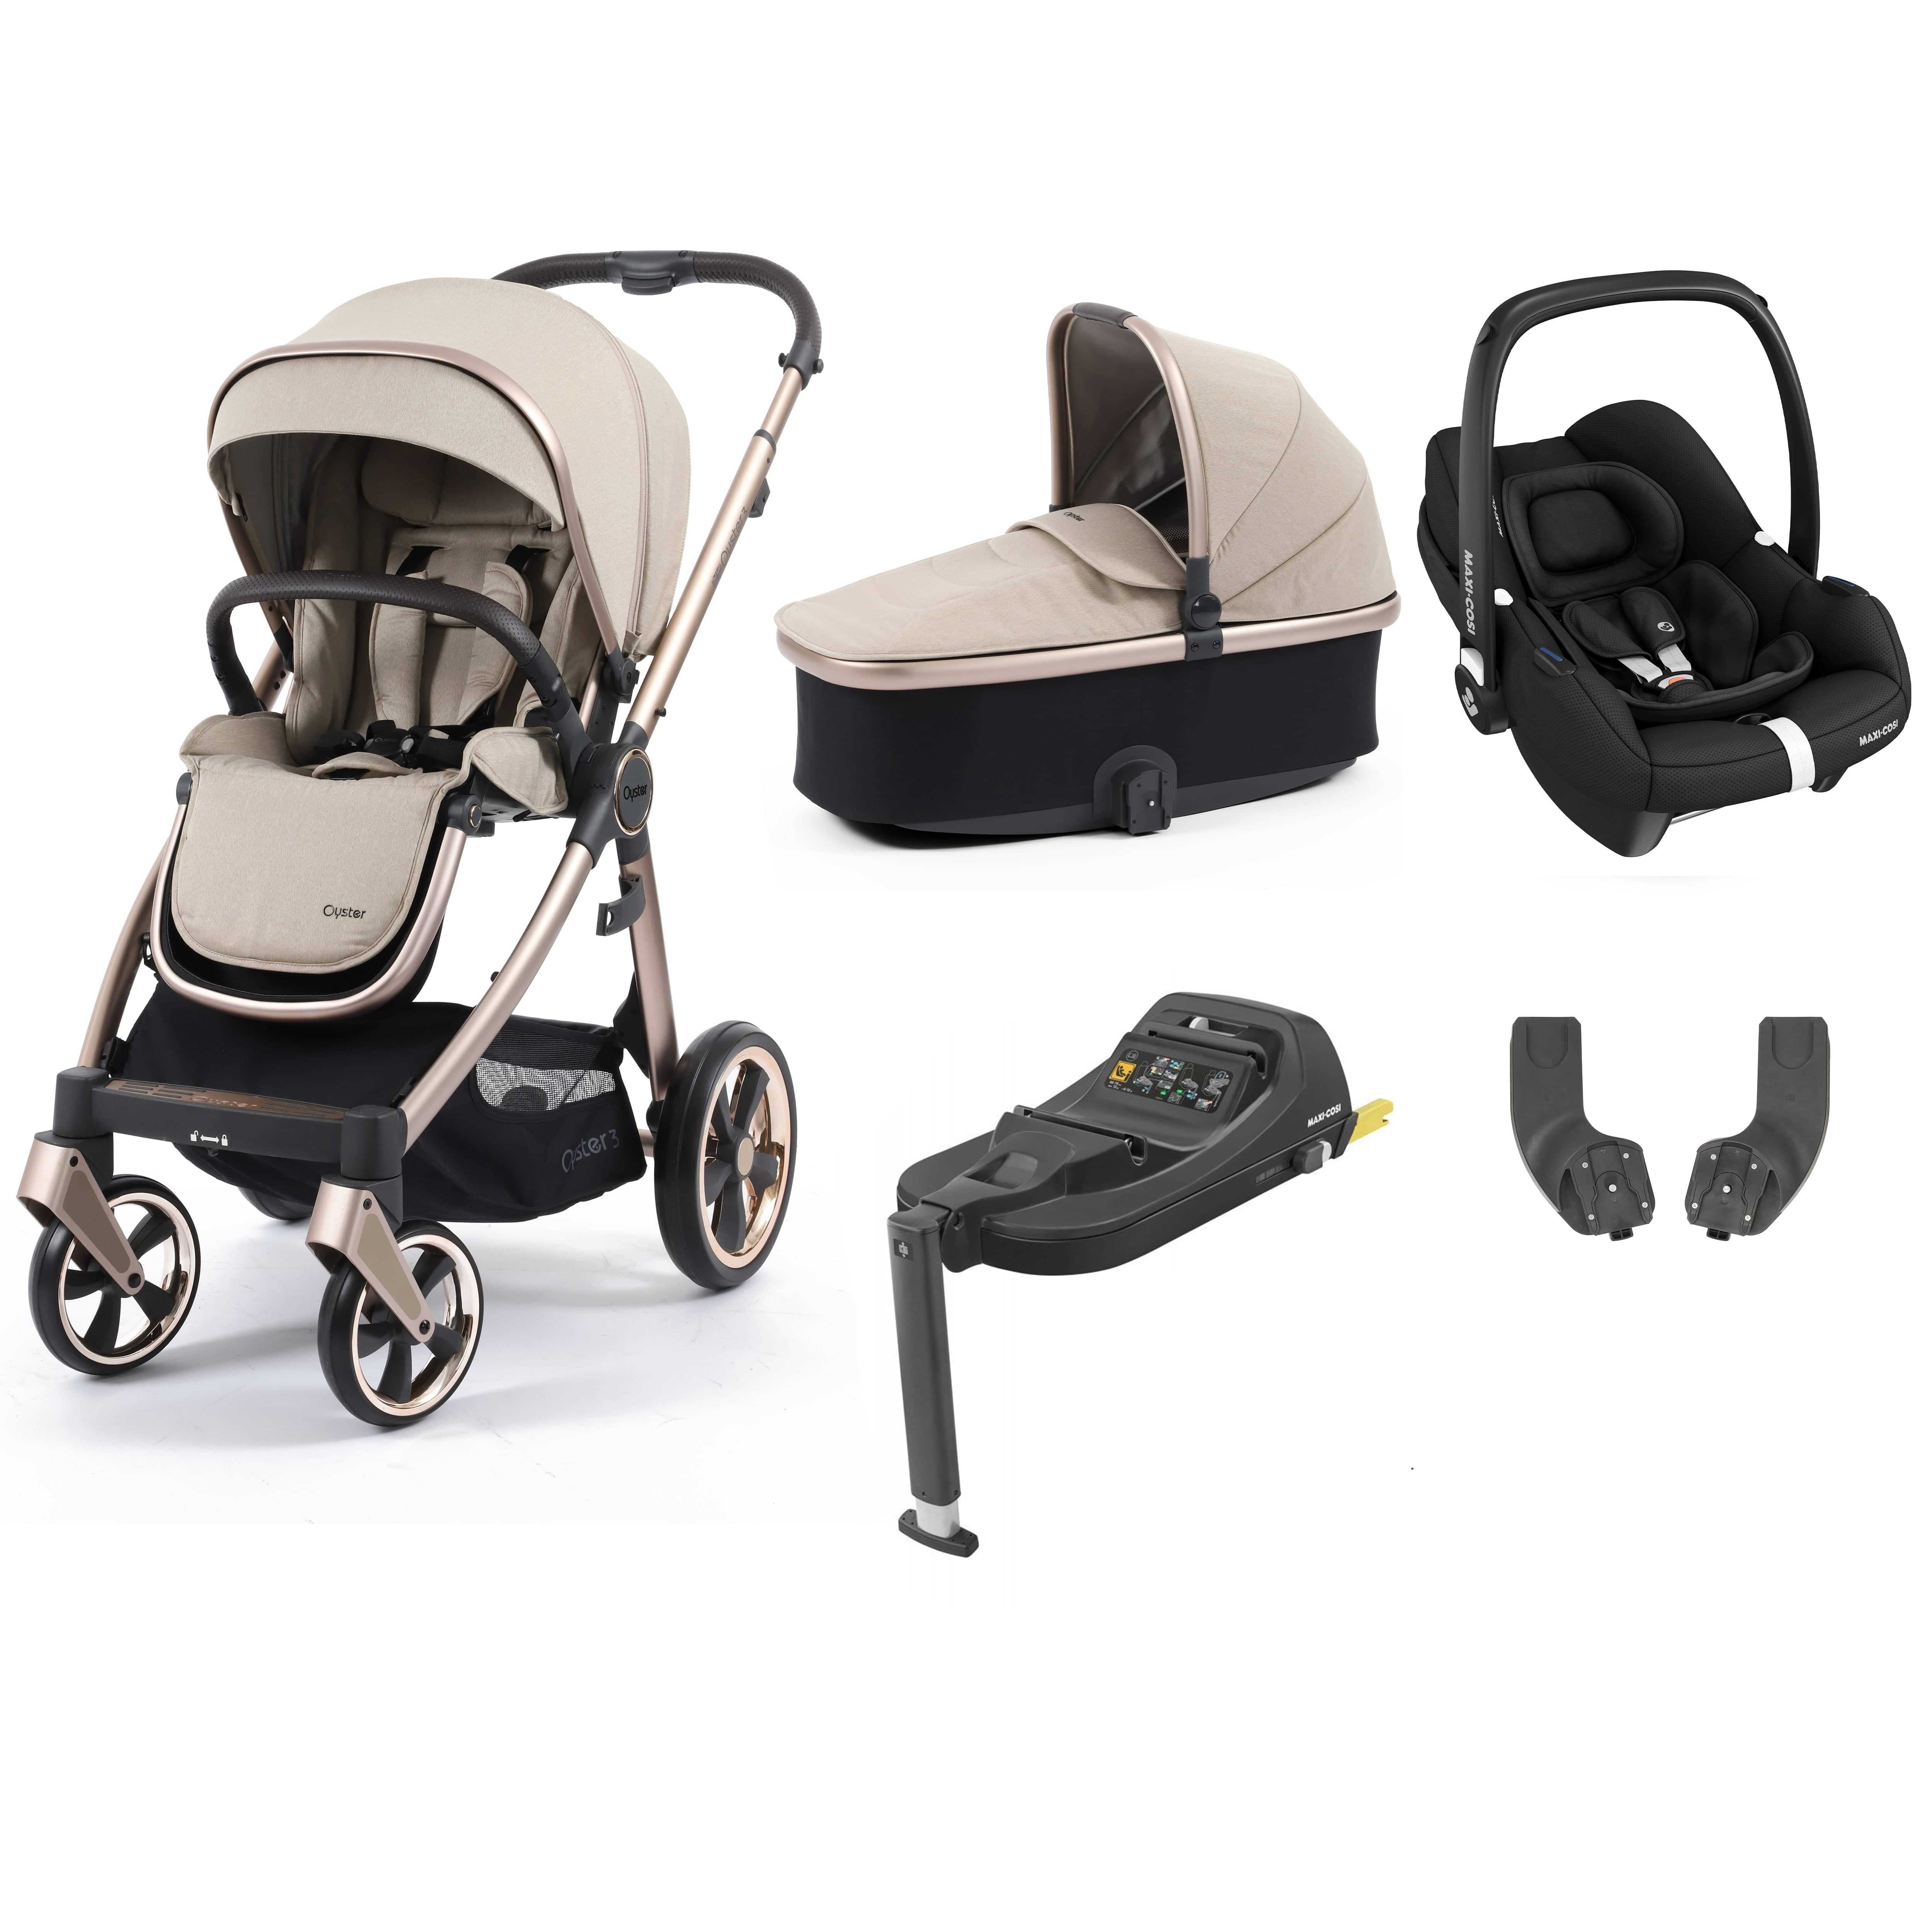 Babystyle Oyster 3 Essential Bundle with Car Seat in Creme Brulee Travel Systems 14762-CMB 5060711567235